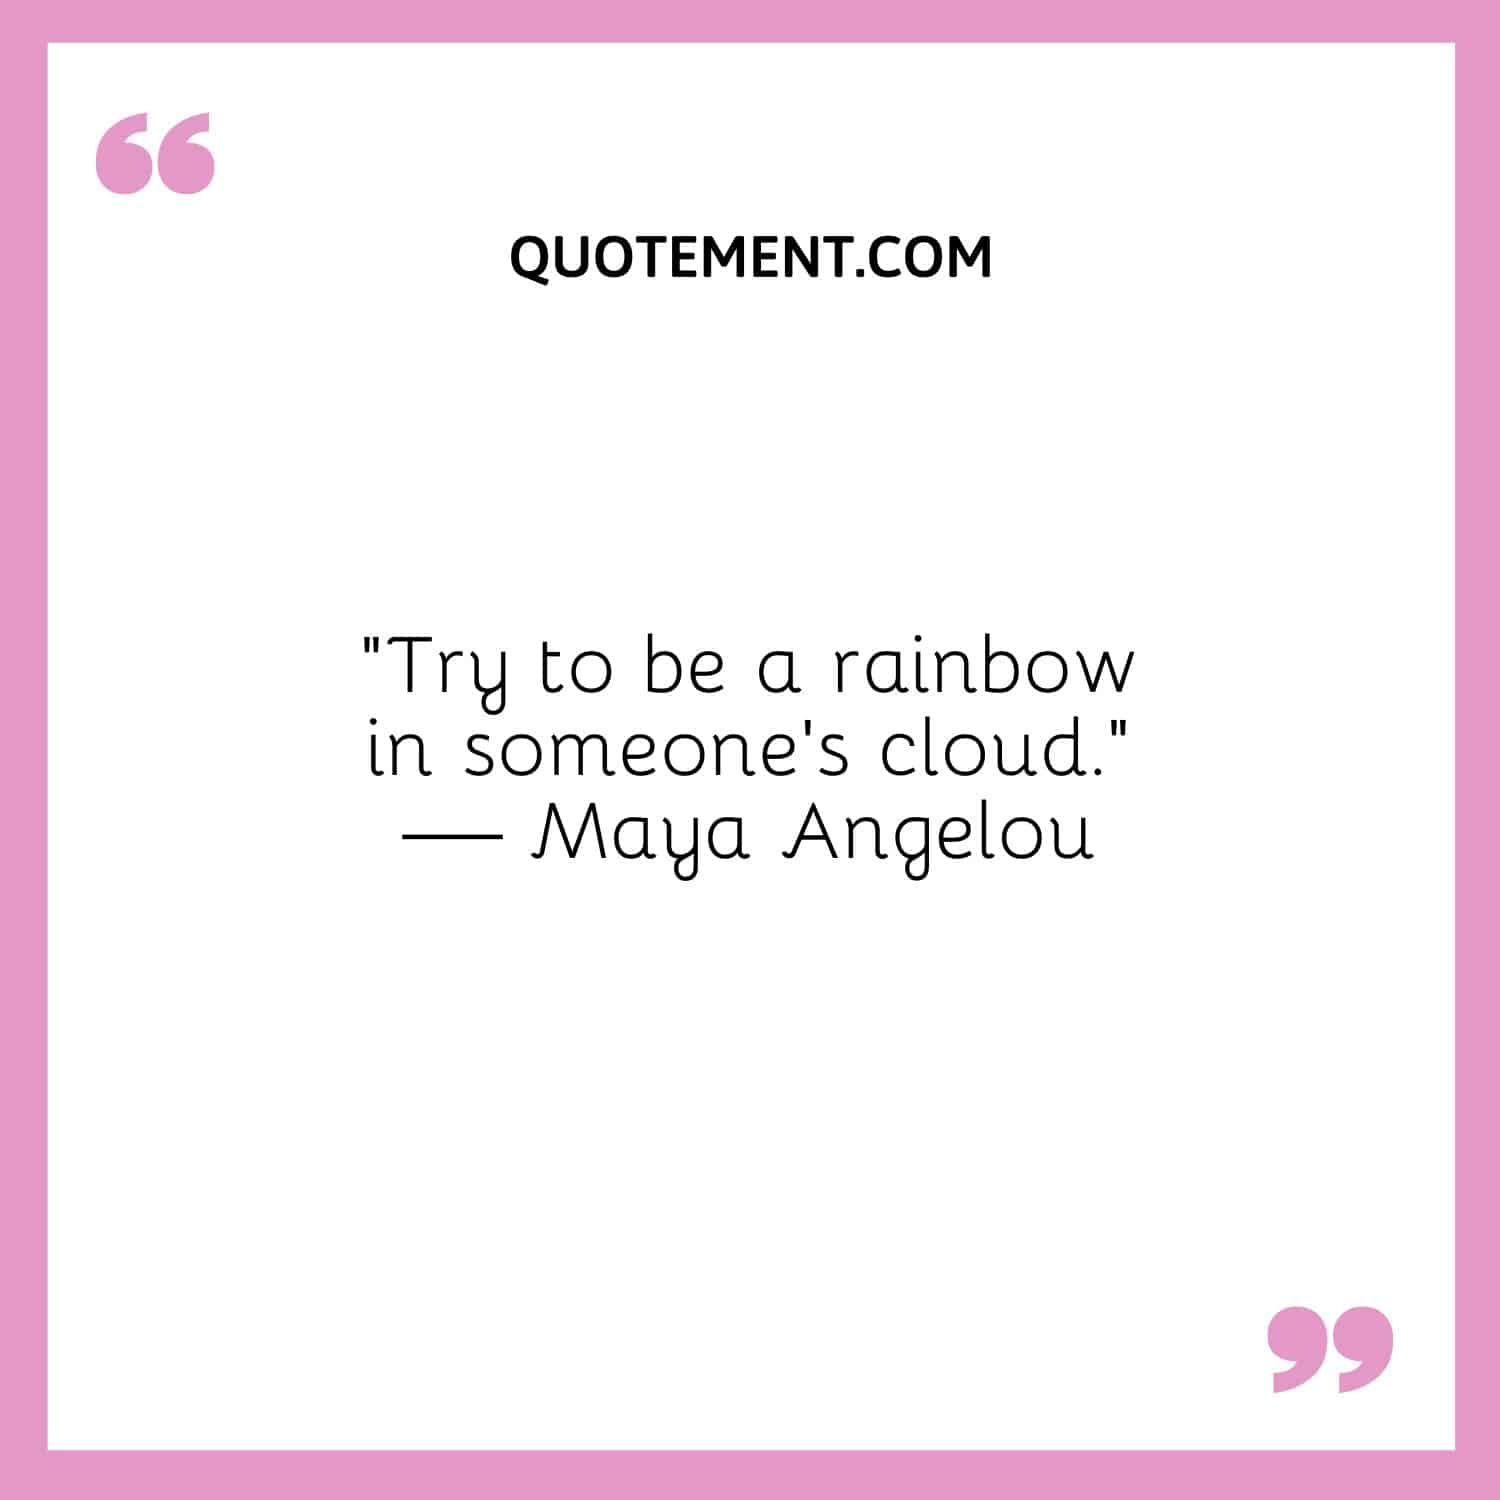 “Try to be a rainbow in someone’s cloud.” — Maya Angelou